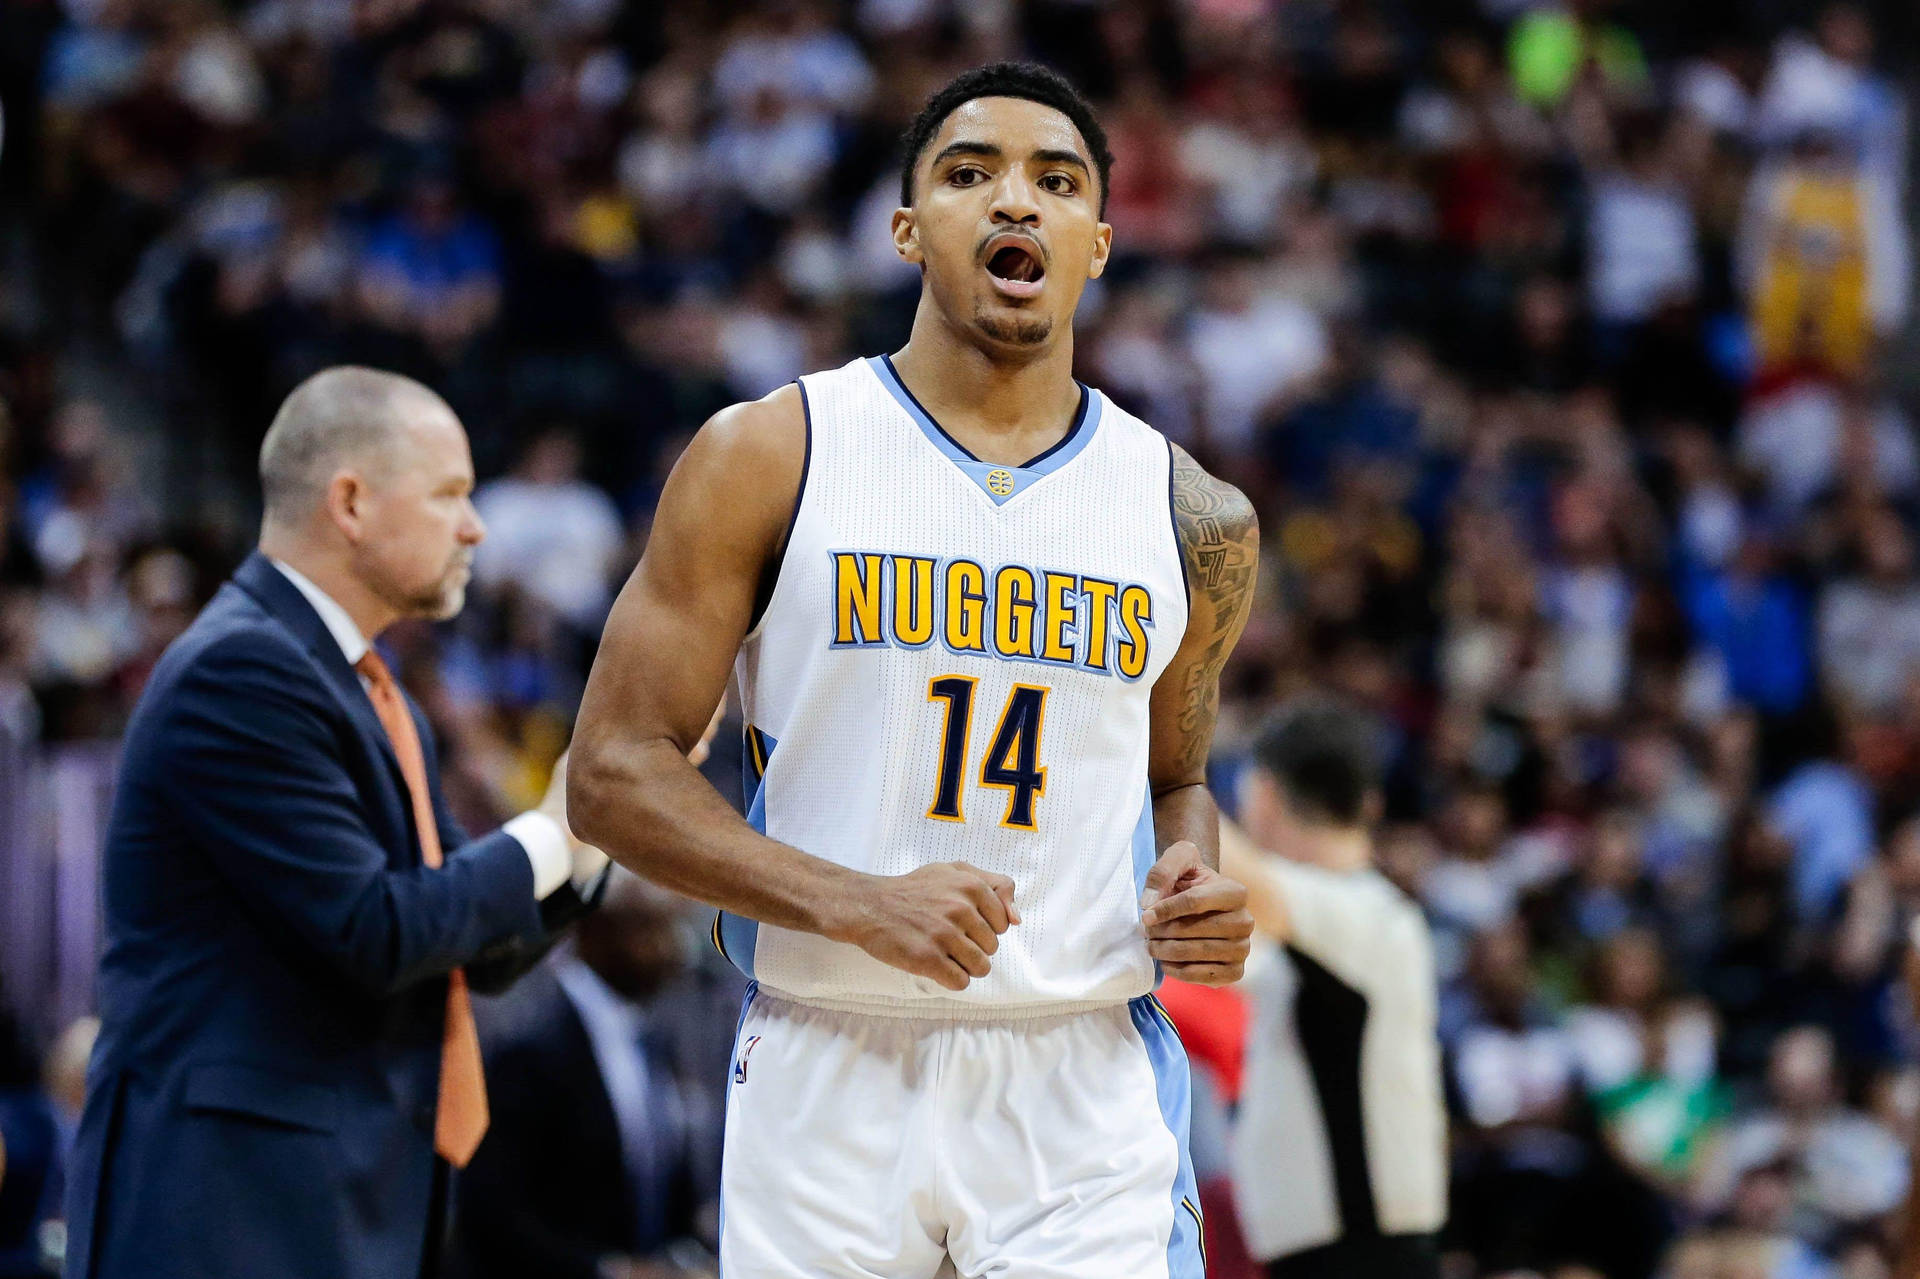 Gary Harris Jersey Number 14 Background